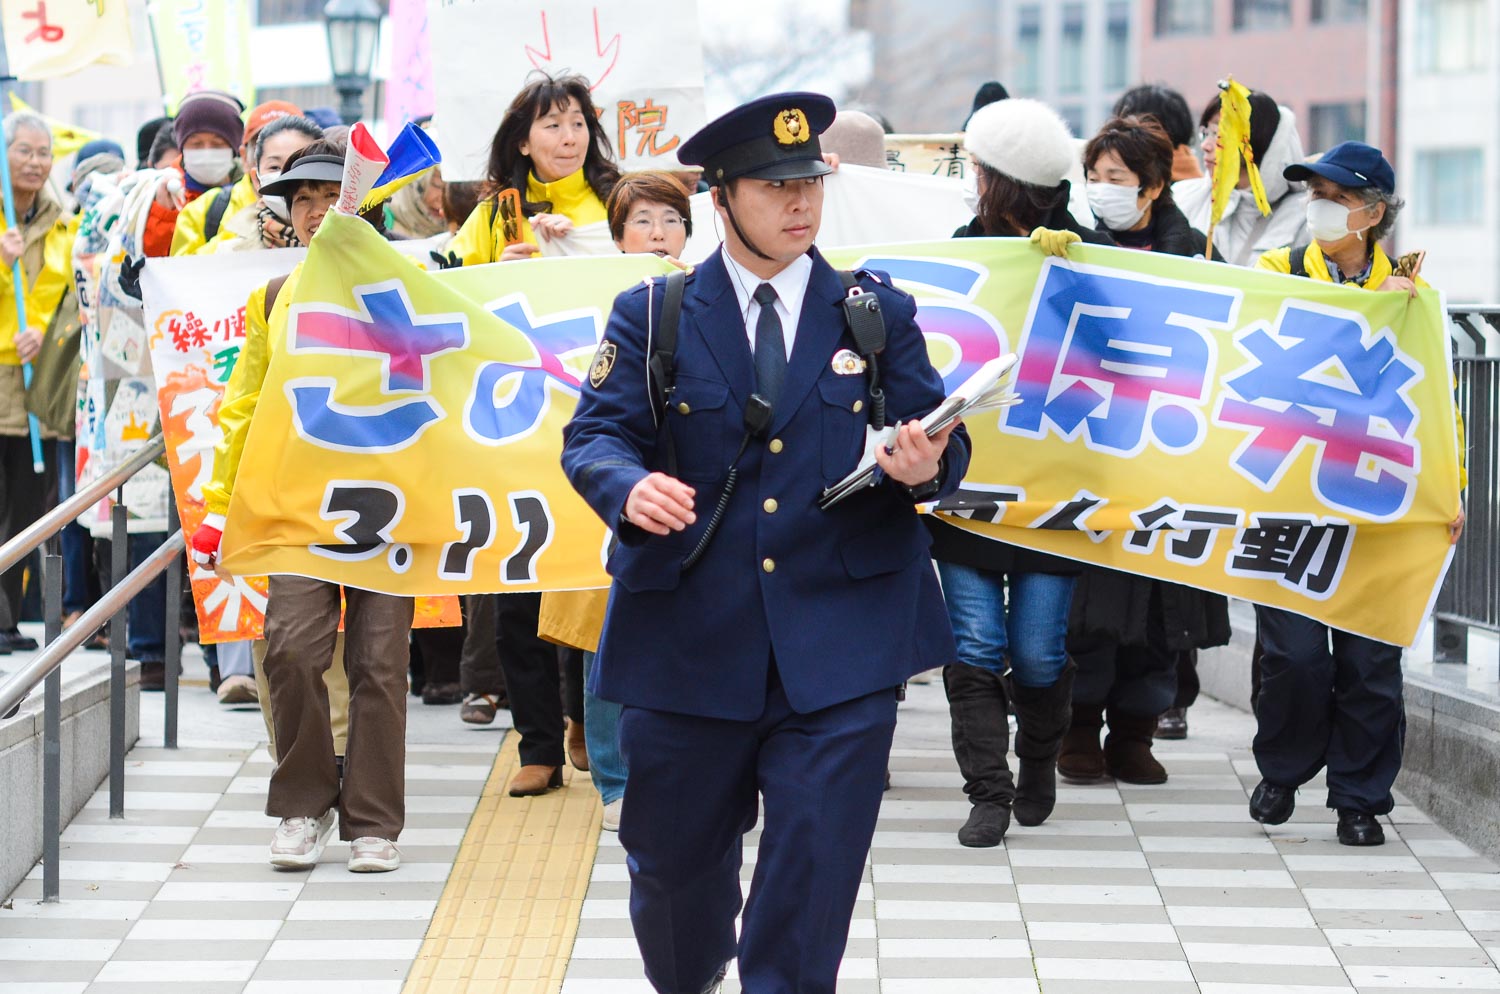  A police officer leads a group of people protesting against the use of nuclear power in Japan. 